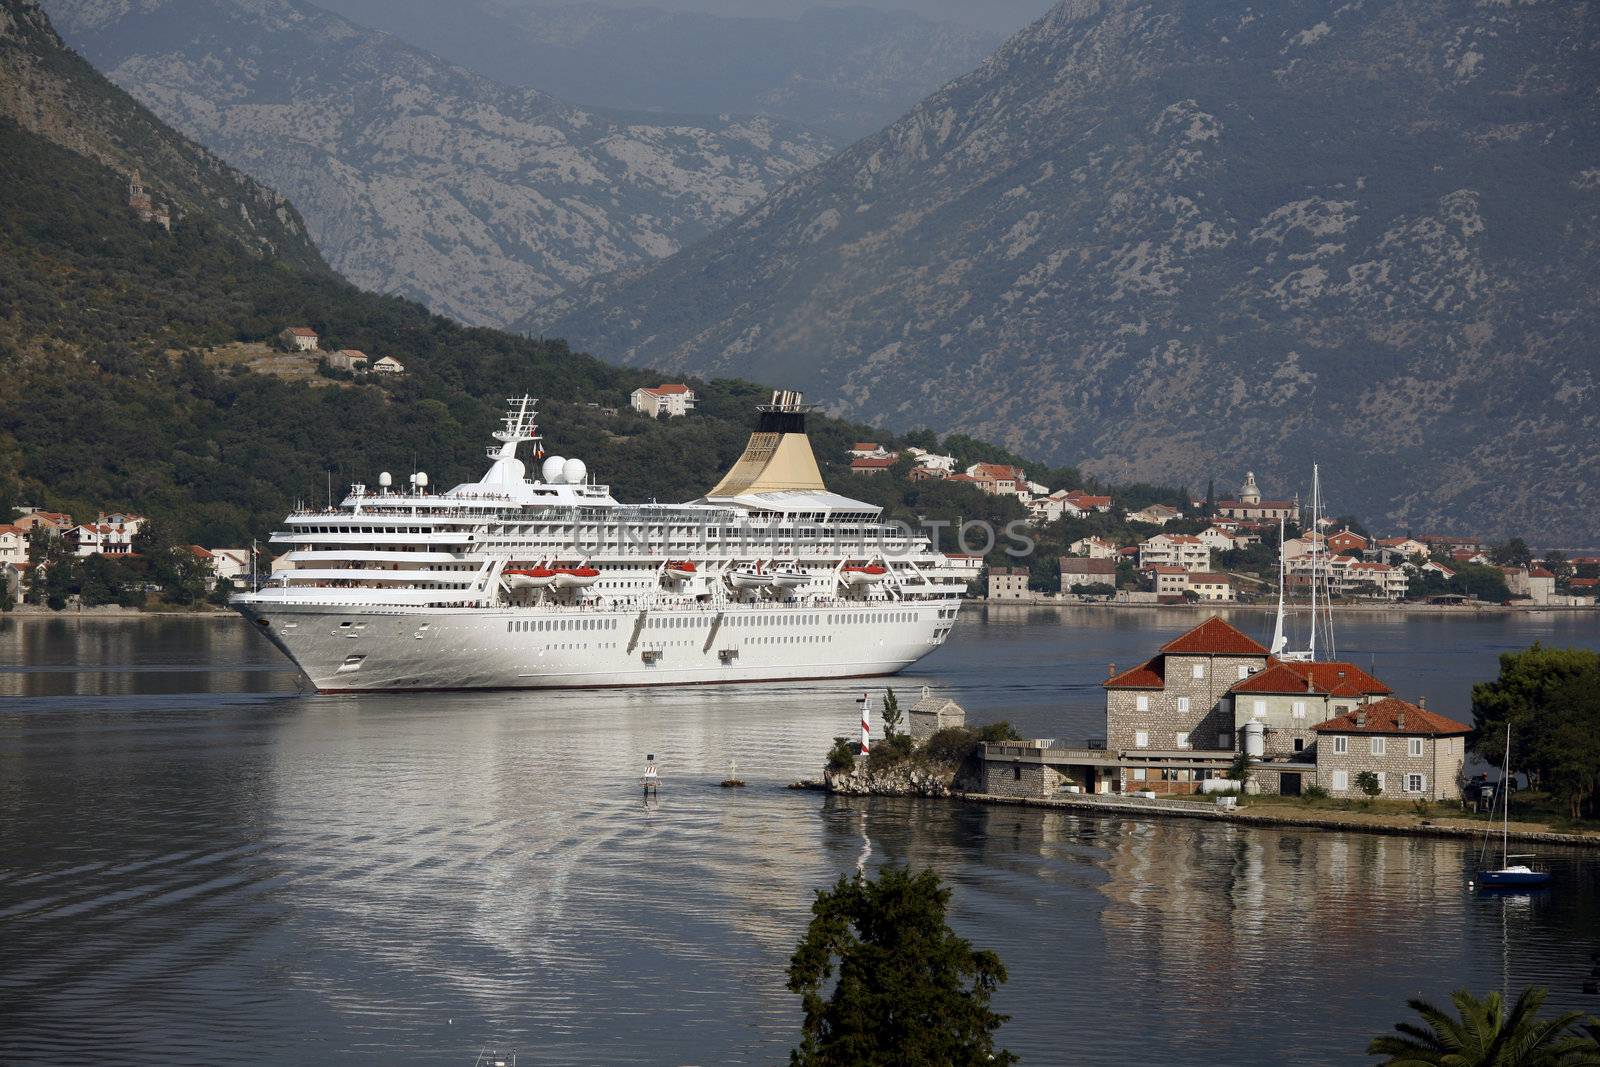 Small cruiser arriving in the inlet of Kotor - Montenegro.